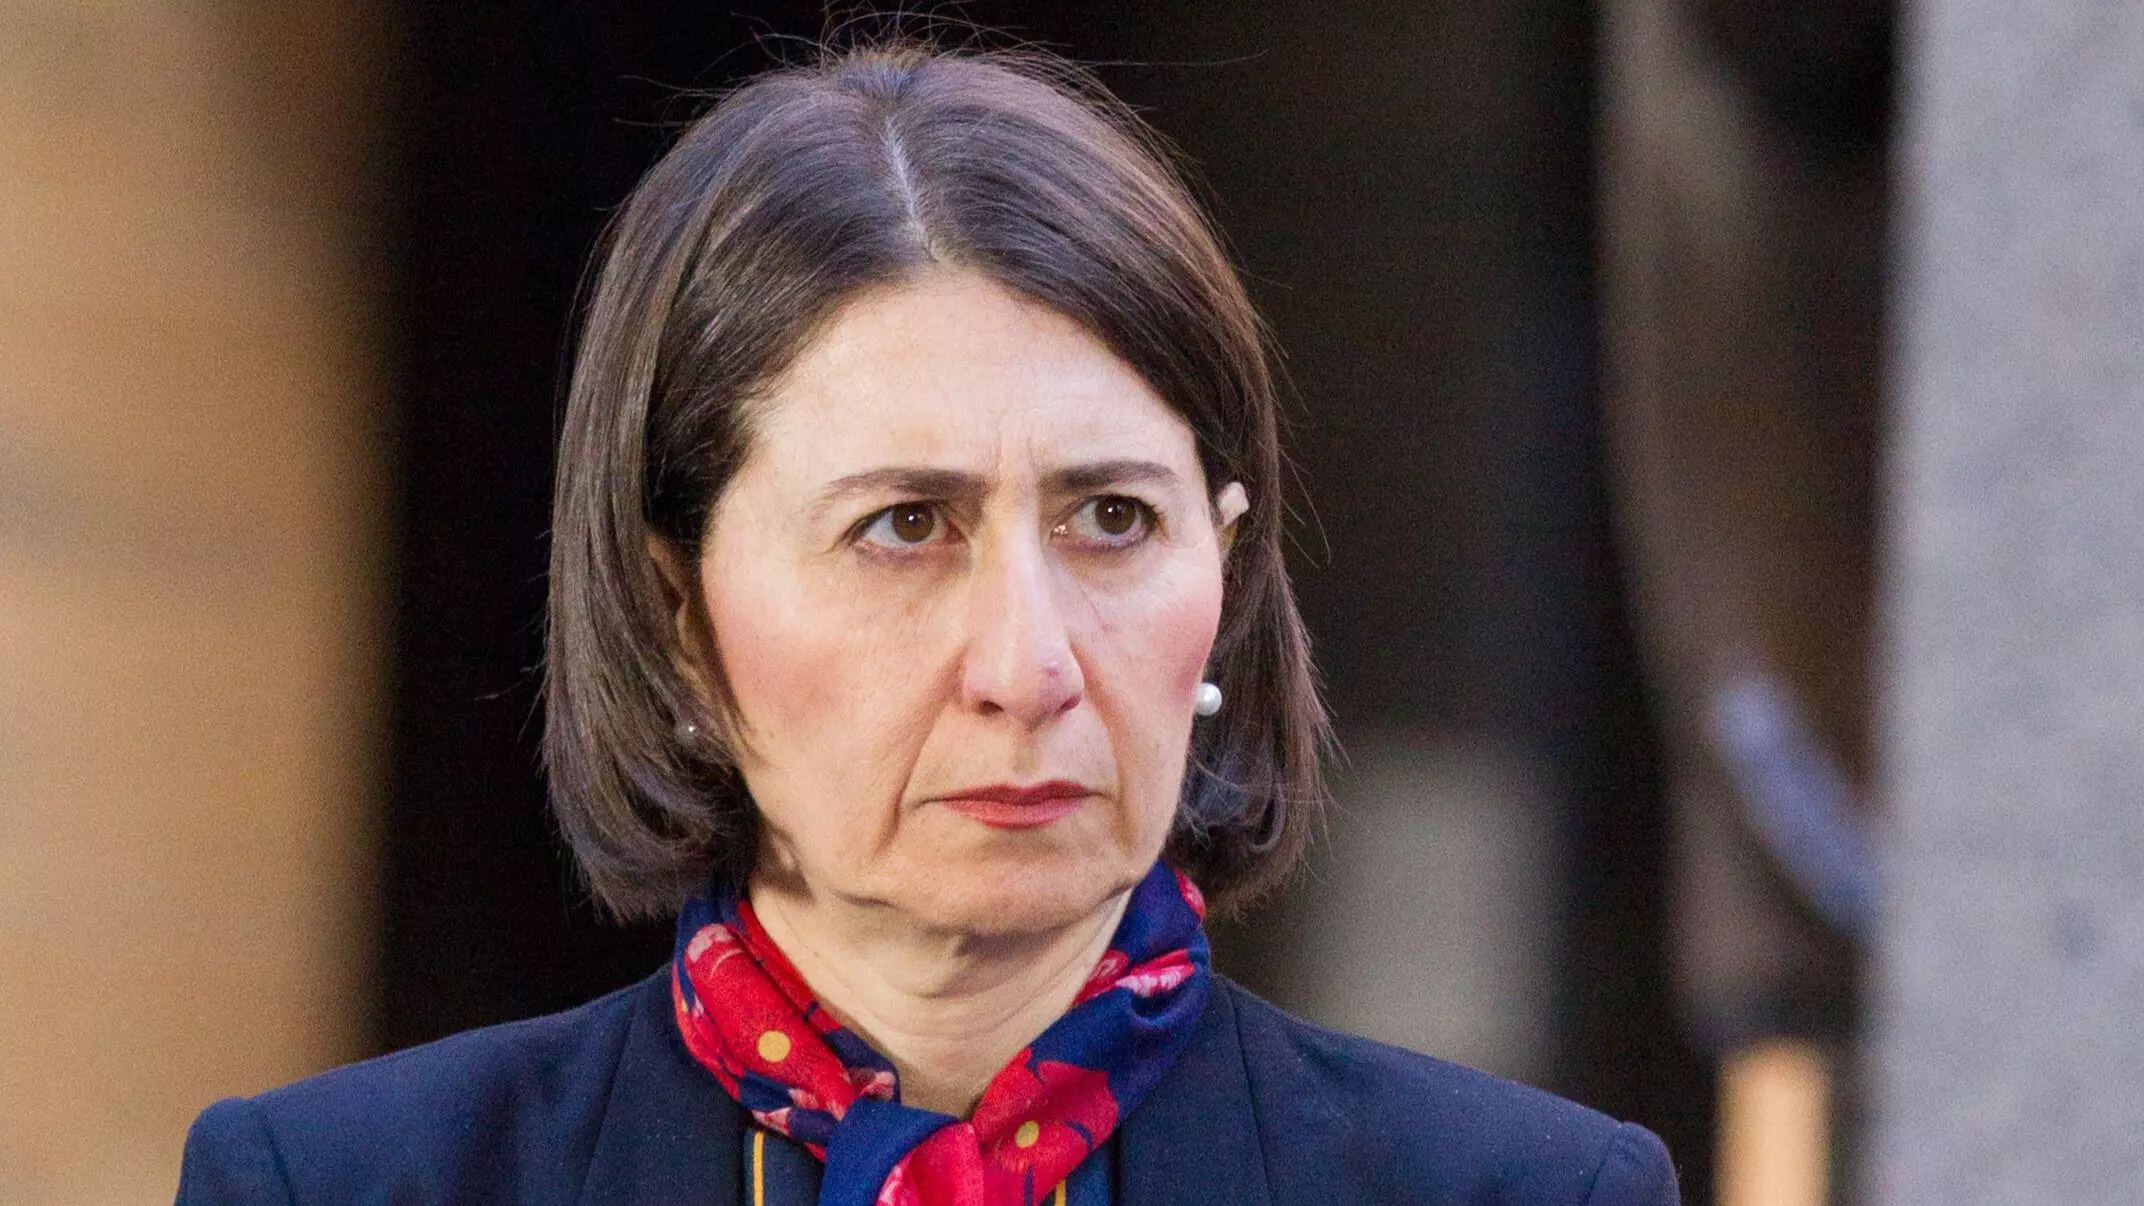 Thousands Sign Petition Calling For Gladys Berejiklian To Come Back As NSW Premier